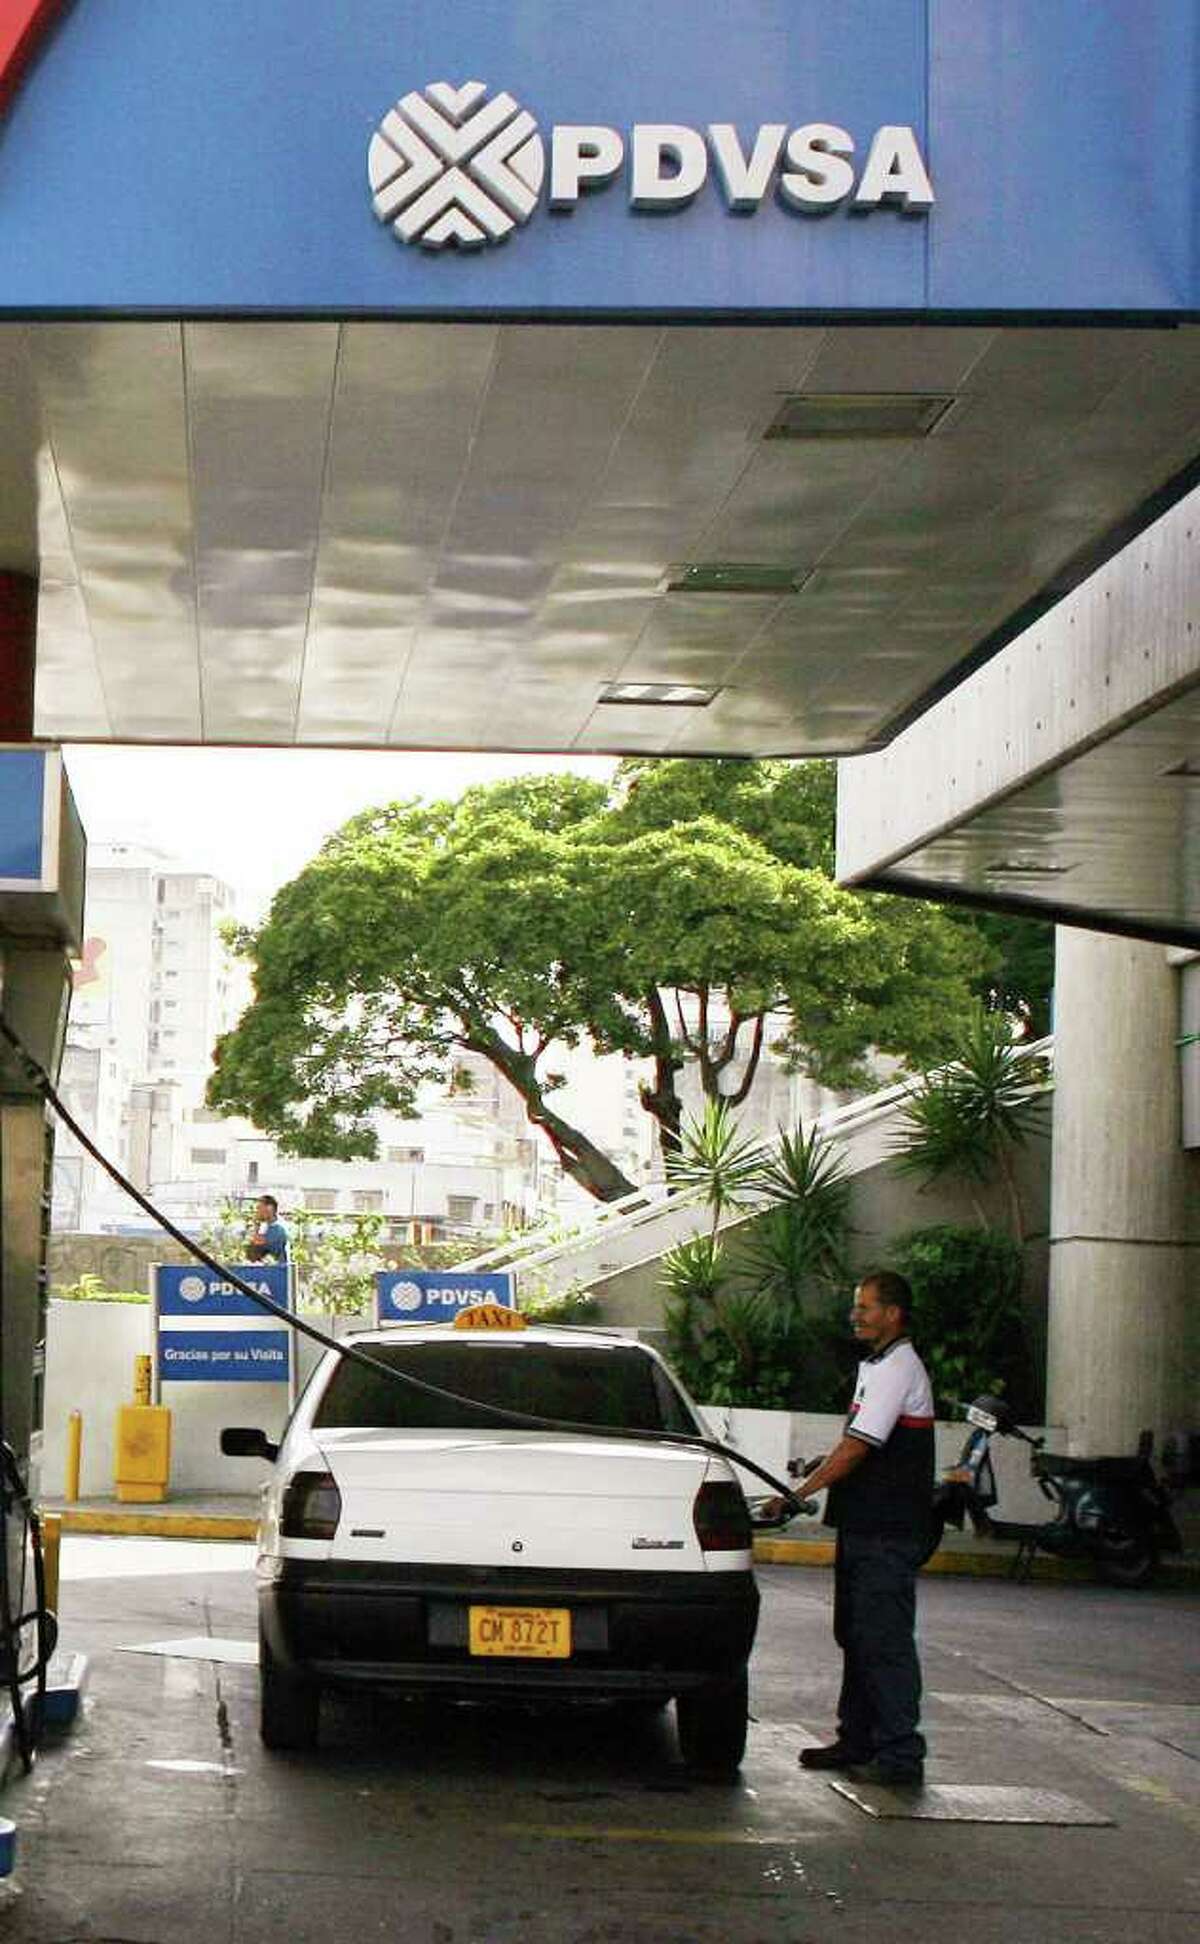 A gas attendant fills the tanks a car at a Petroleos de Venezuela S.A. station in Caracas, Venezuela, in this file photo. U.S. prosecutors say Francisco Illarramendi, a Venezuelan-American residing in New Canaan, used unregistered hedge funds in Stamford as cover for a massive Ponzi scheme with exclusively overseas clients, including the pension funds for workers at the government-run oil company. Photographer: Susana Gonzalez/Bloomberg News